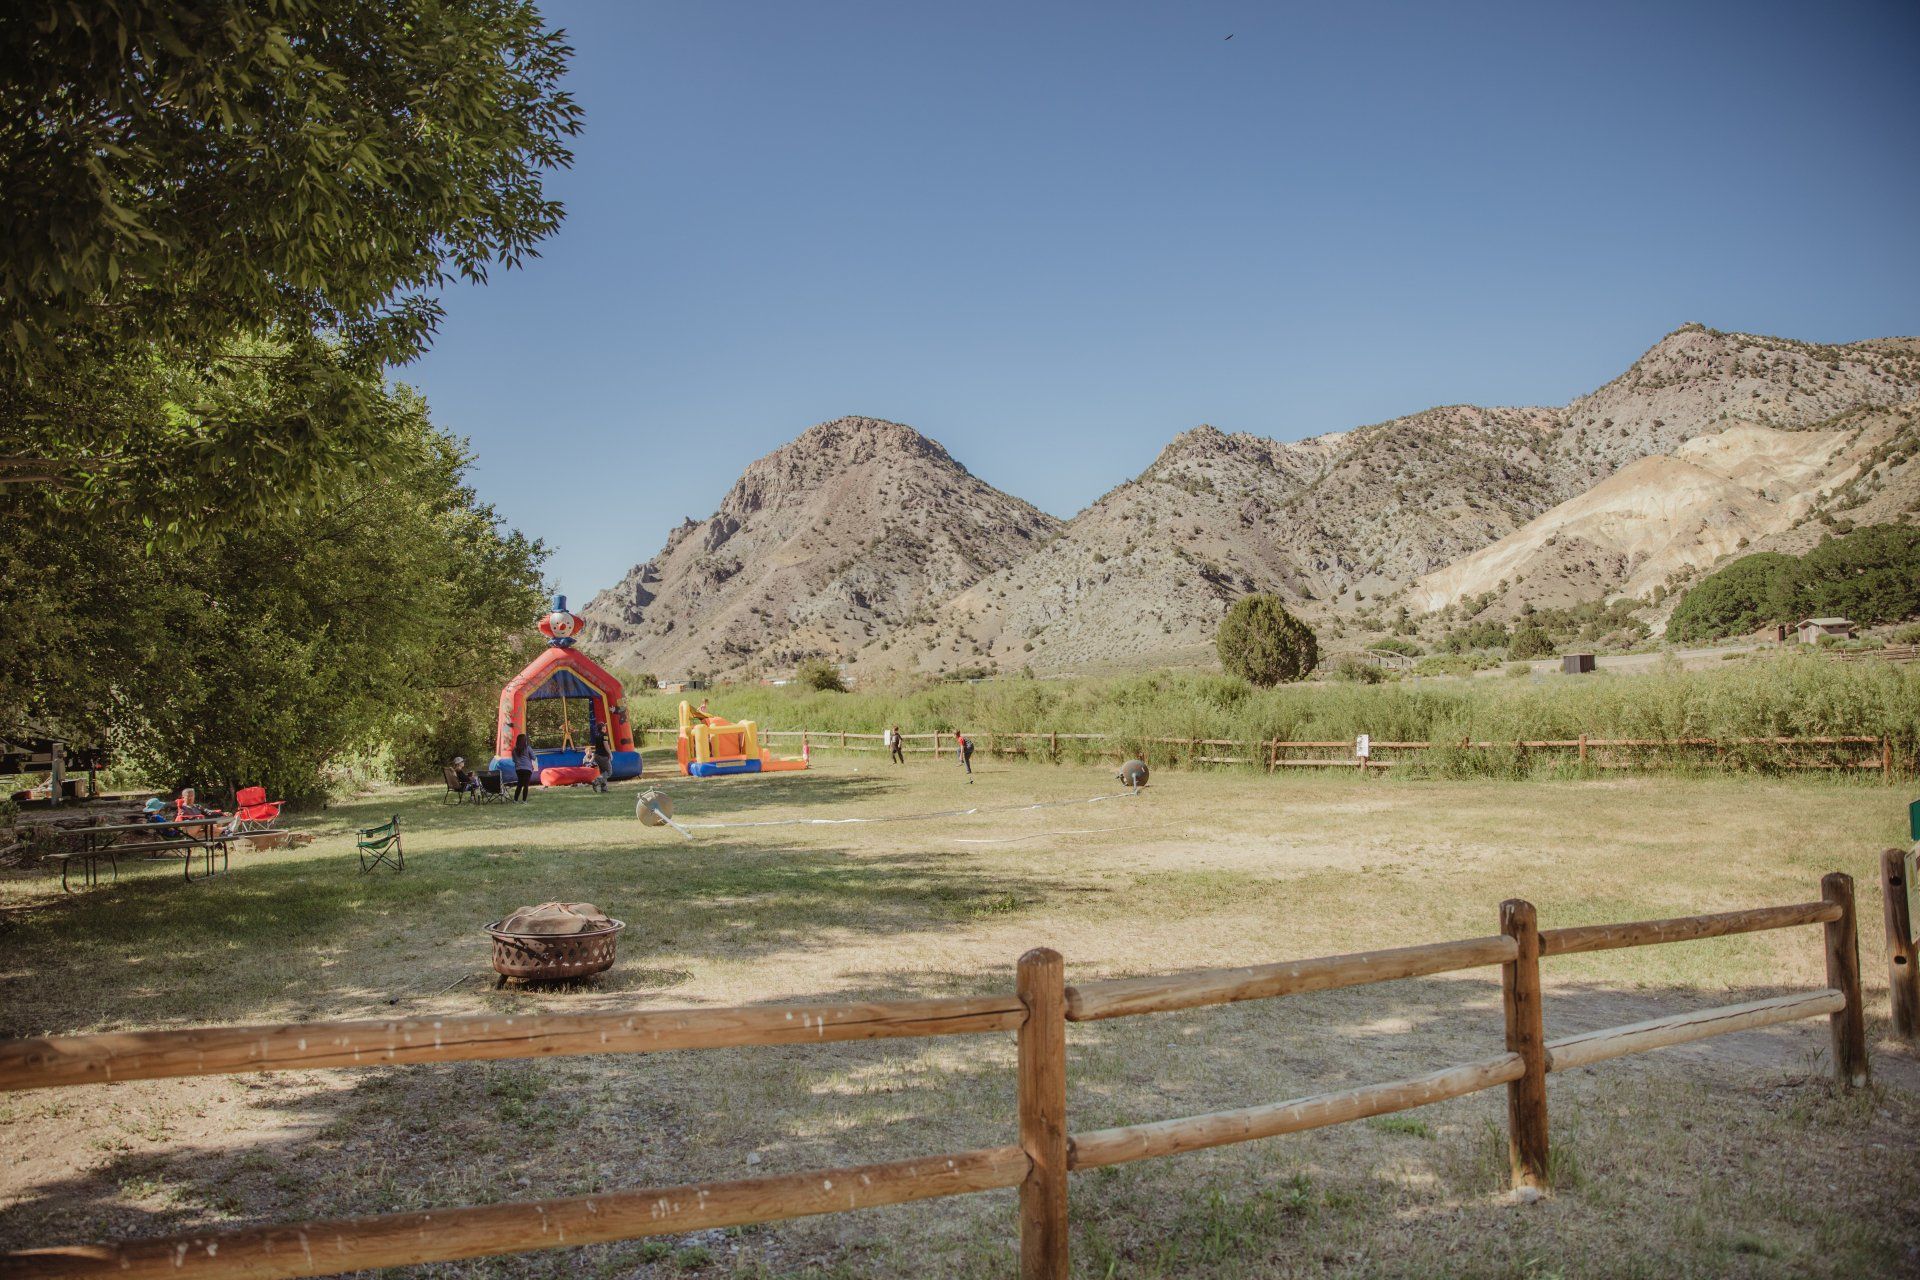 there is a bouncy house in the middle of a field with mountains in the background .